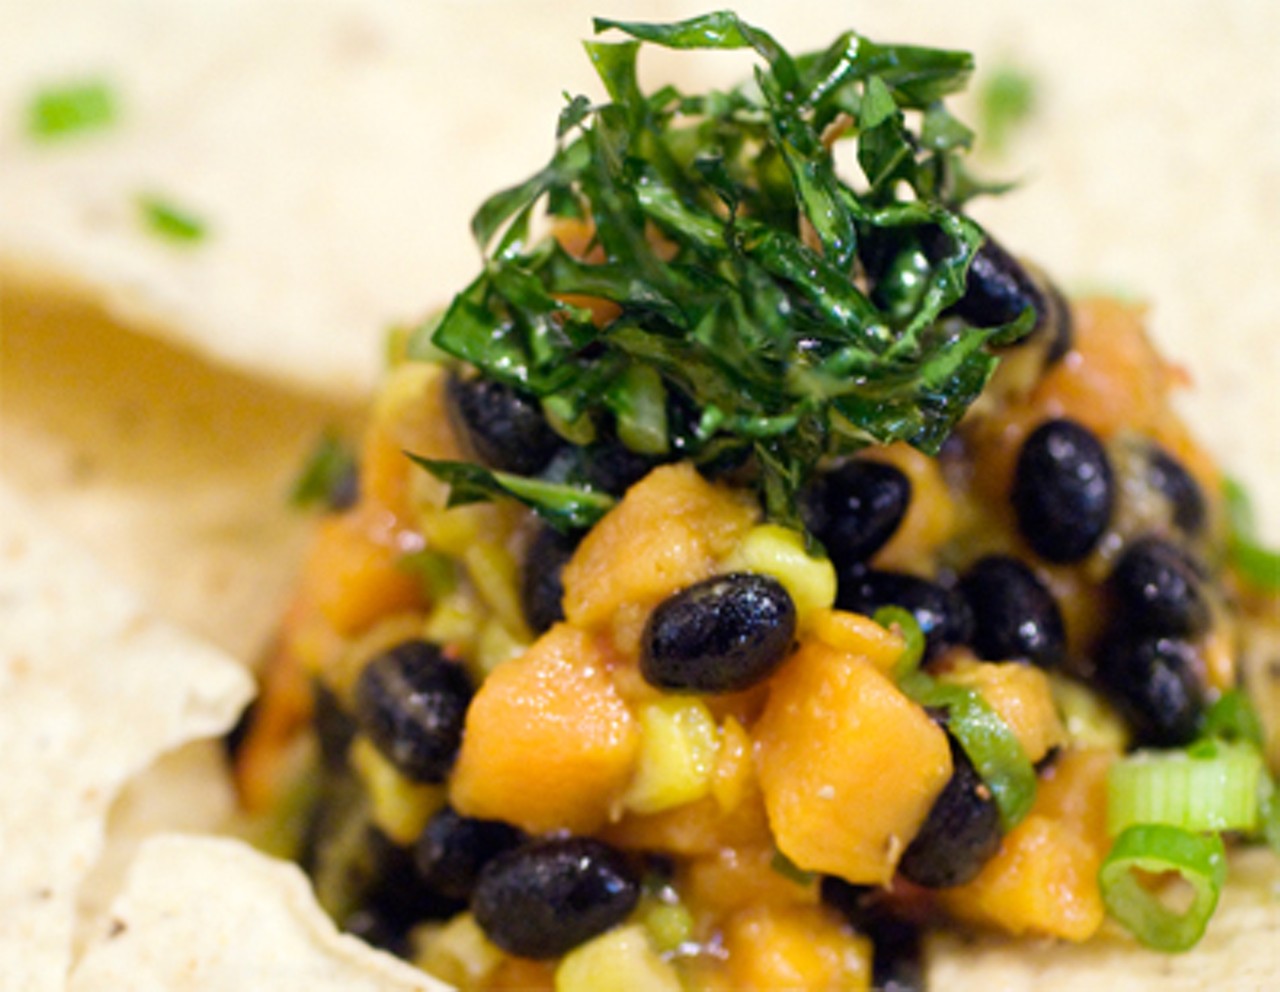 Sweet potato salsa with tortilla chips. Read our review of the Bleeding Deacon by Ian Froeb.